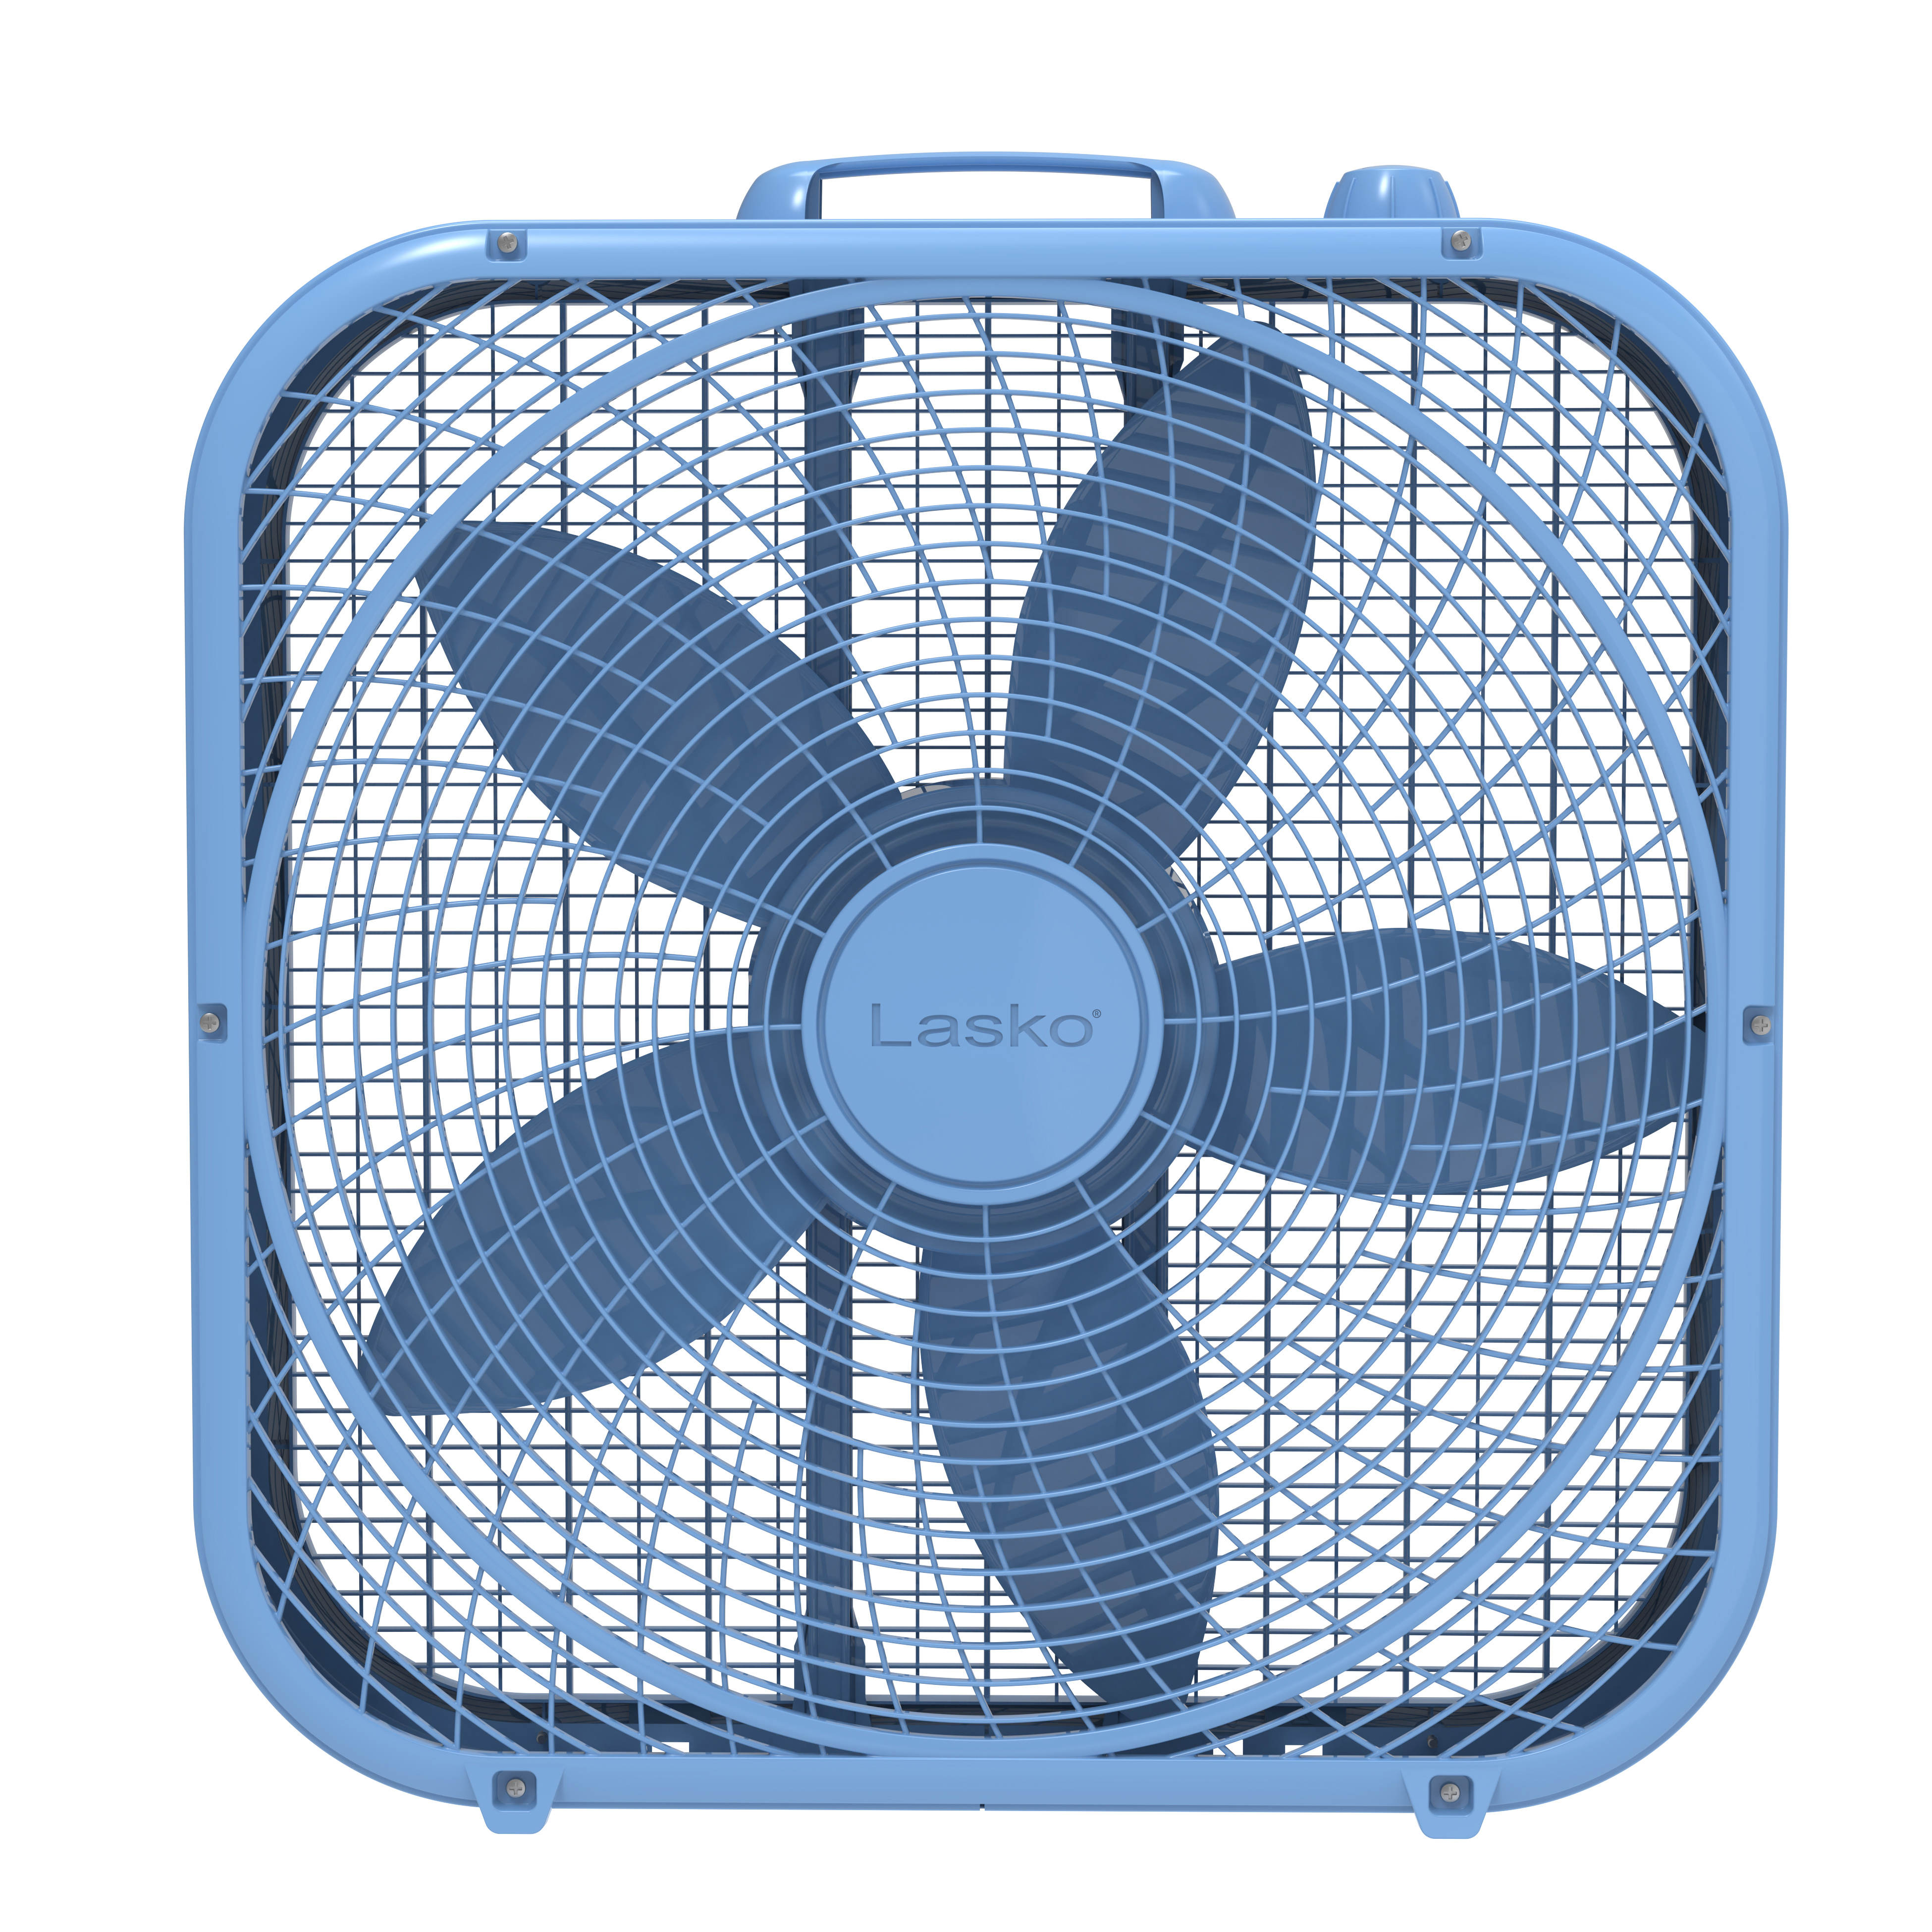 Lasko 20" Cool Colors 3-Speed Box Fan with Weather-Resistant Motor, Blue, 22.5" High, B20310, New - image 2 of 7